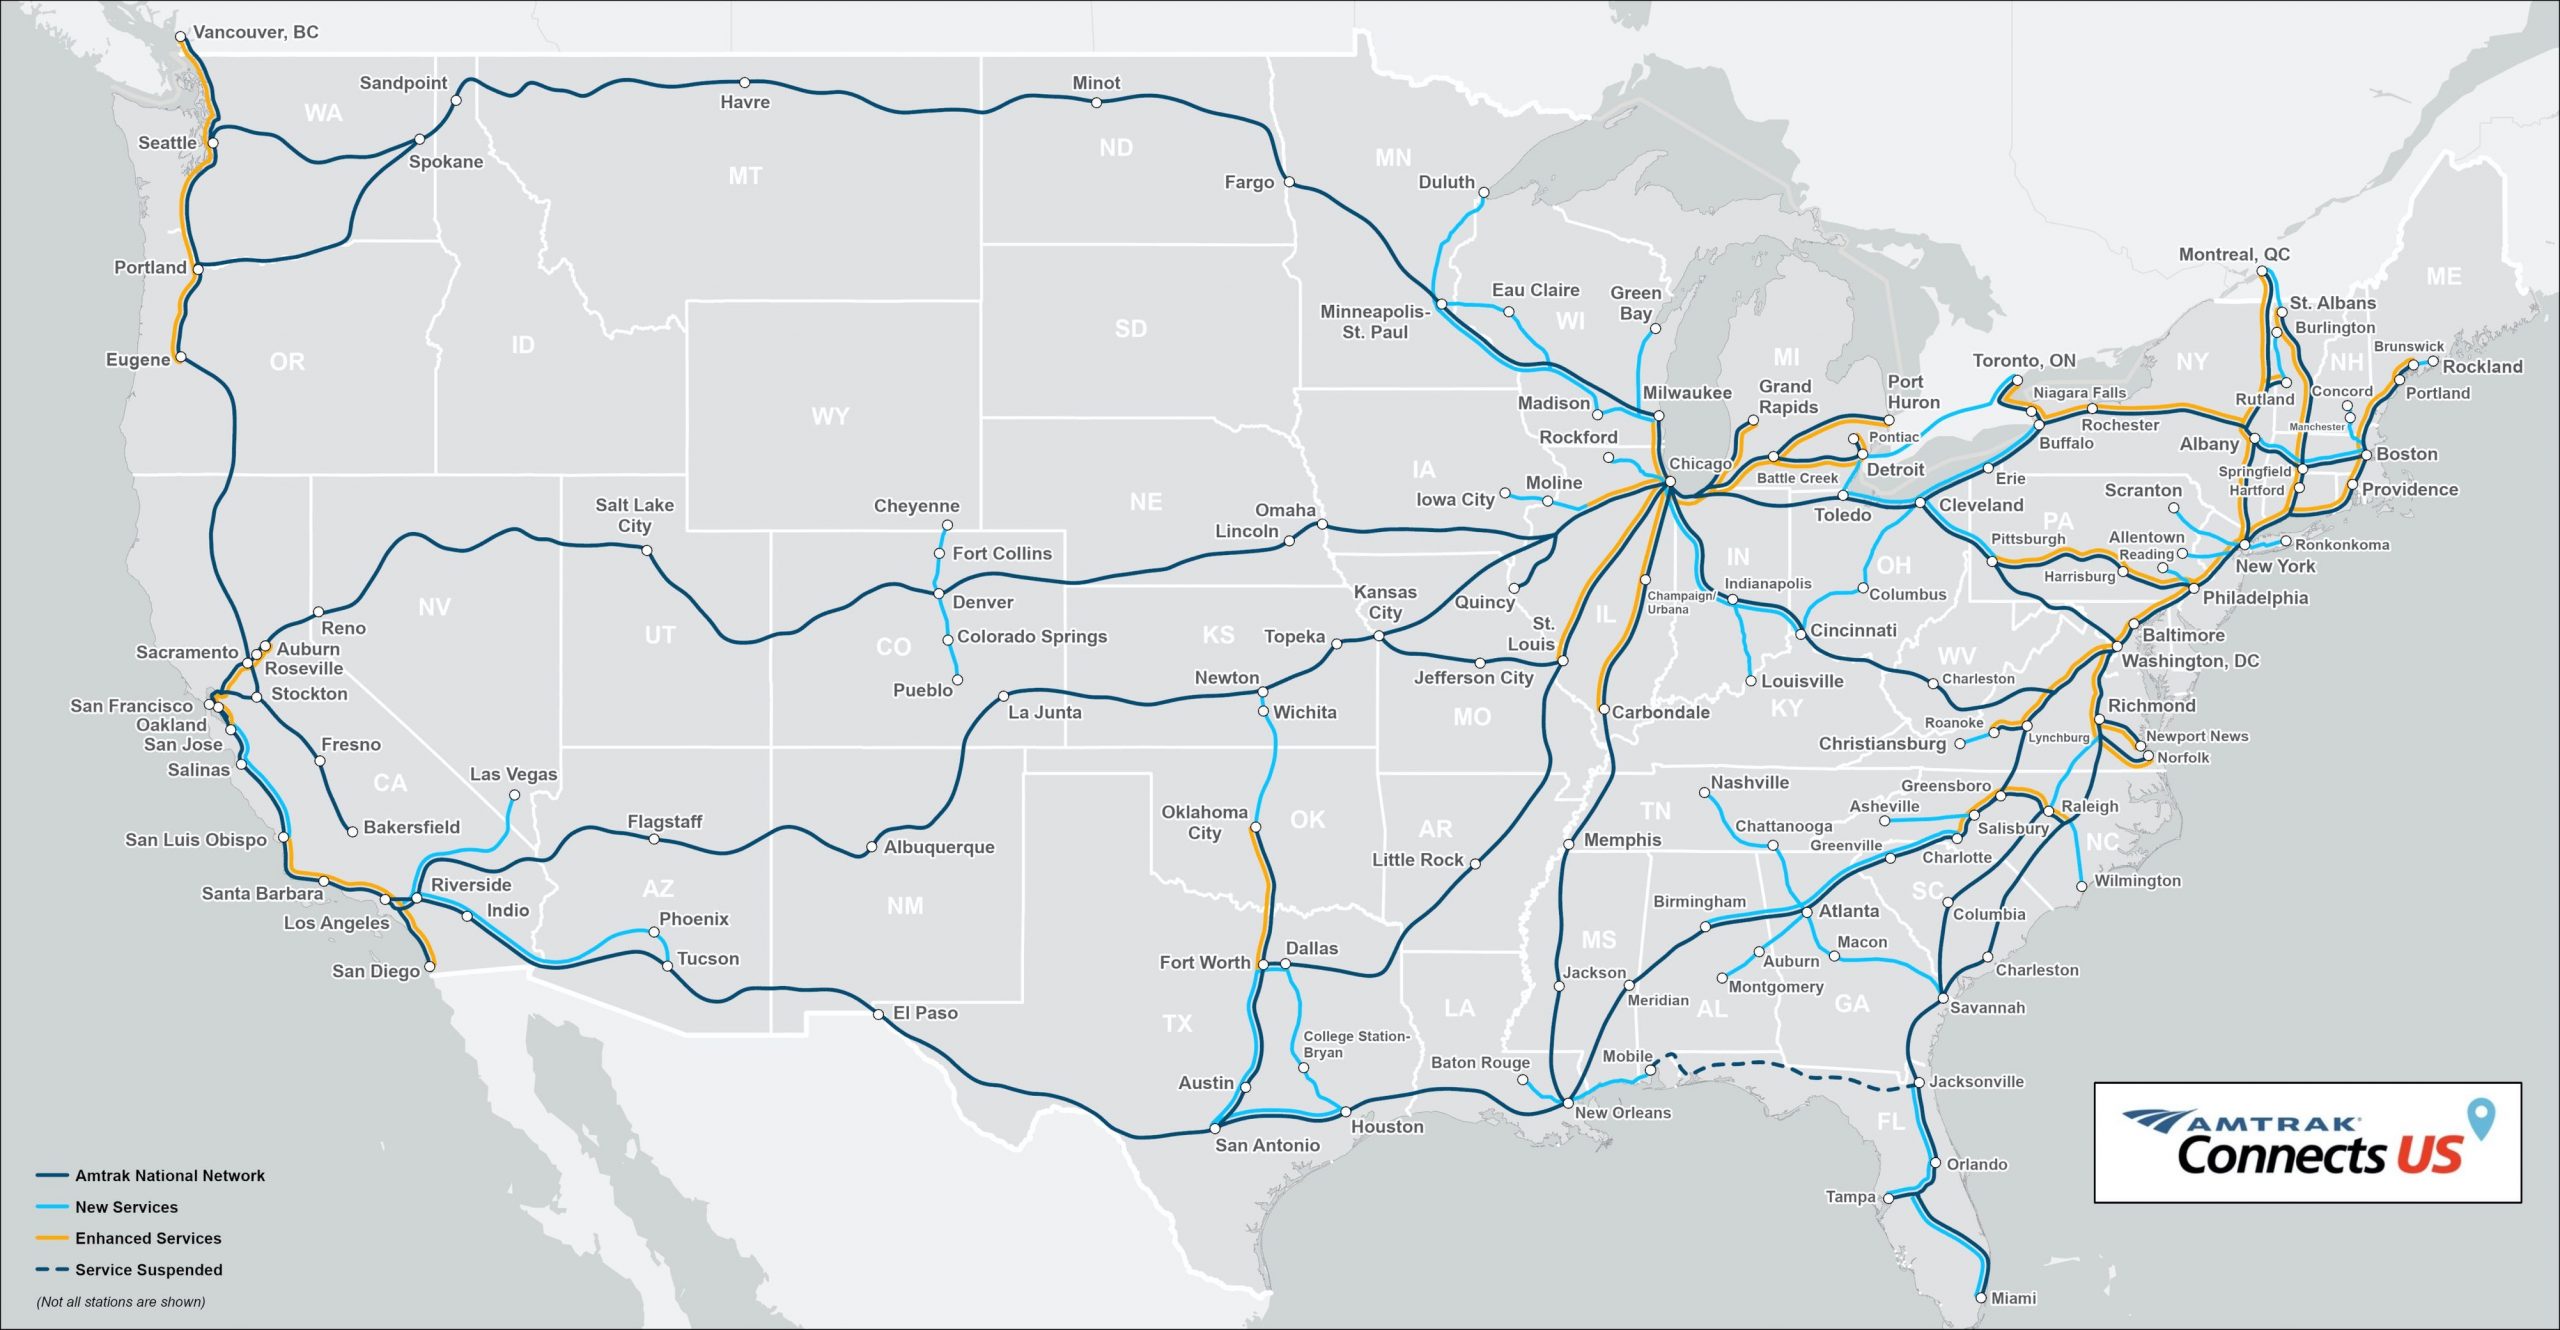 Amtrak Connect US Map 2021 March